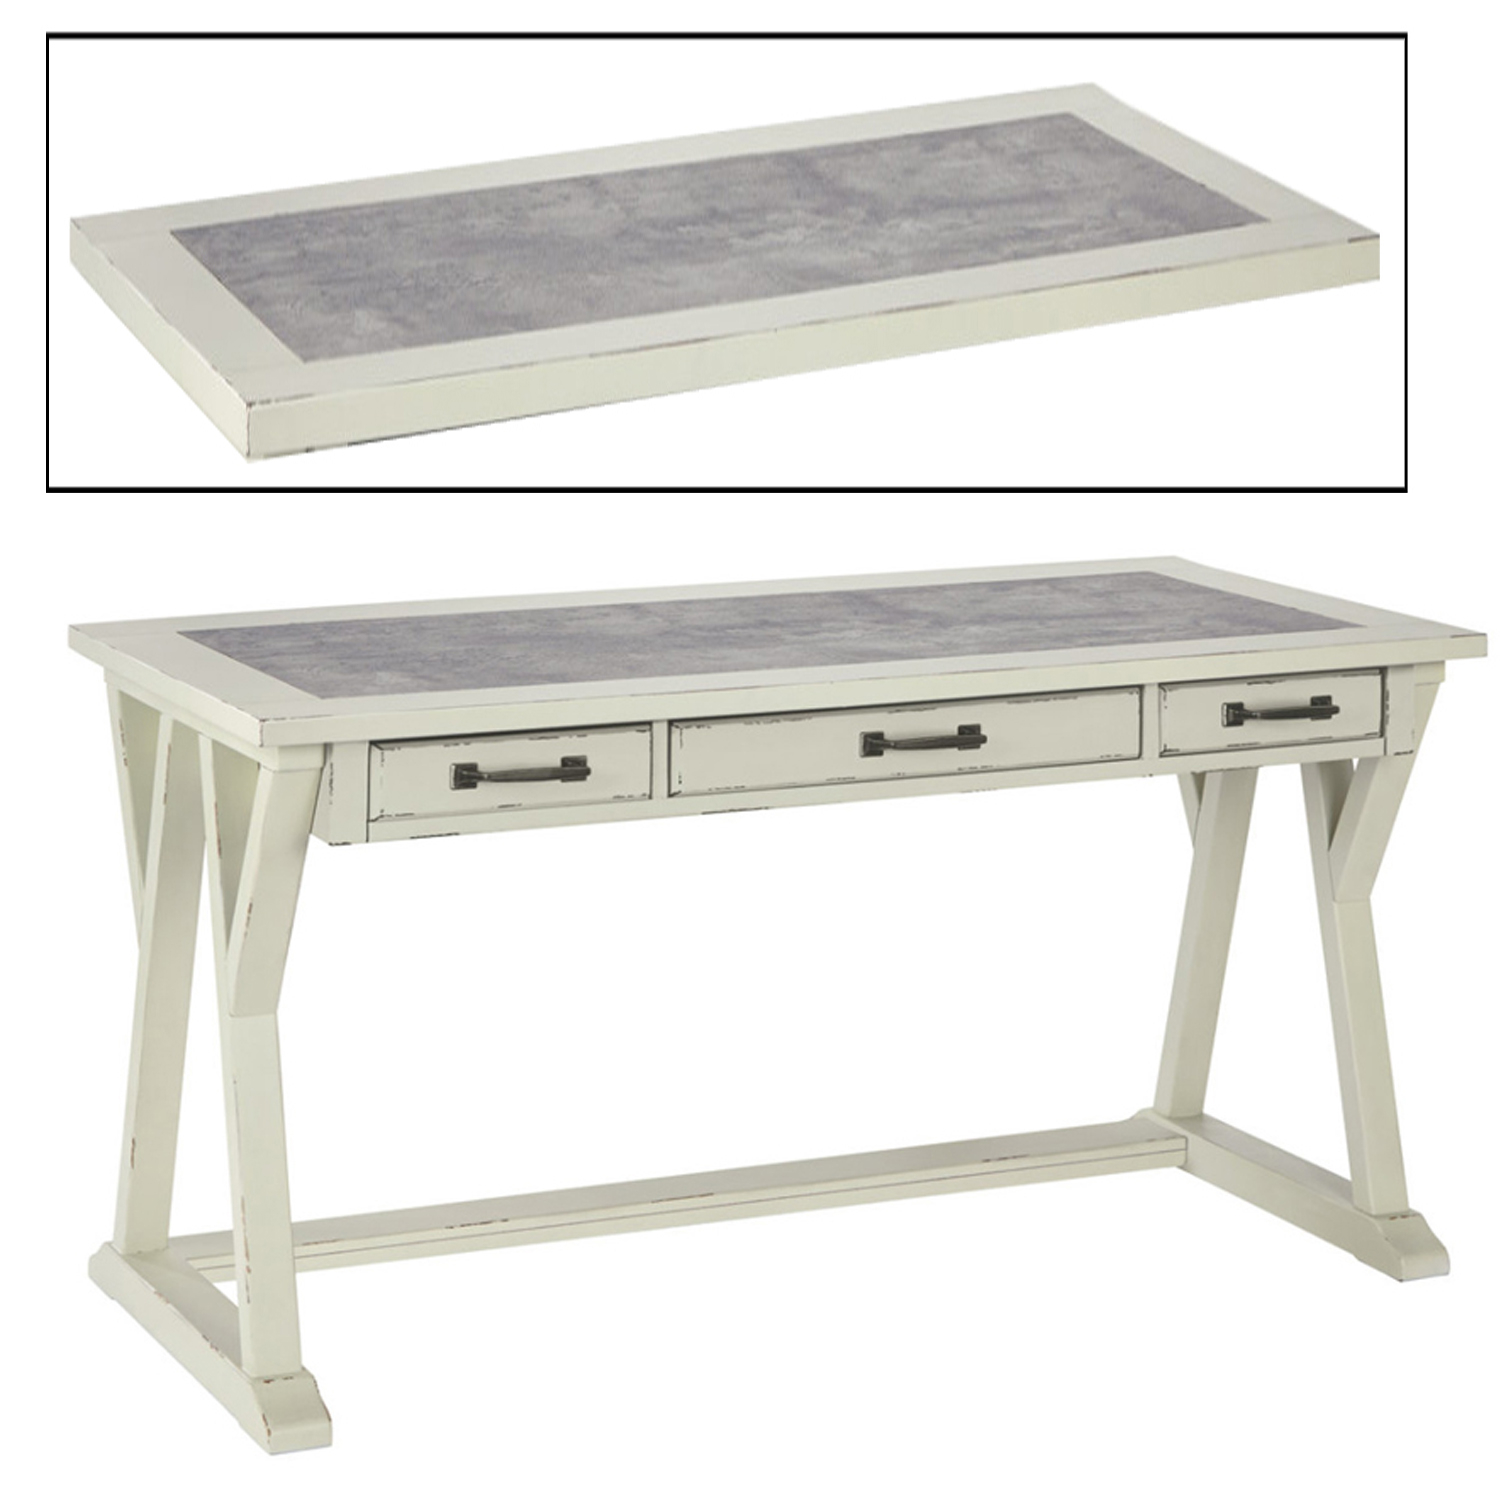 Three Drawers Wooden Desk With Faux Cement Top And Trestle Base, White And Gray- Saltoro Sherpi